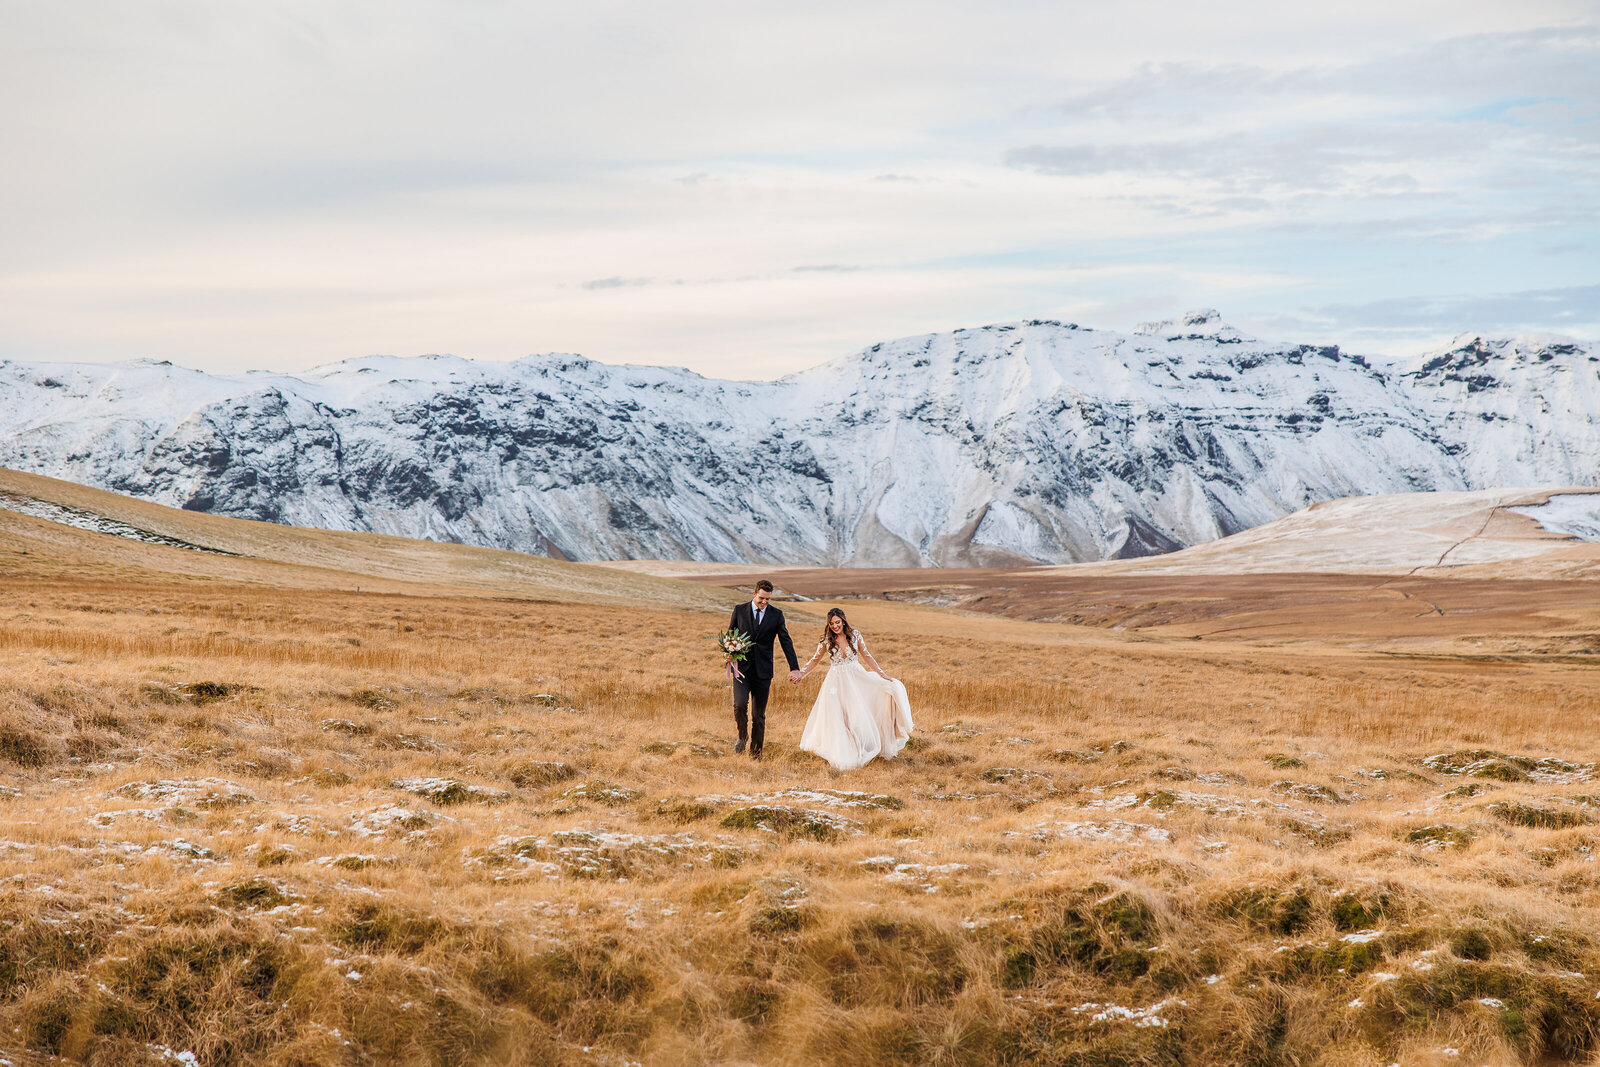 This couple eloped in front of the mountains in the Iceland Highlands.